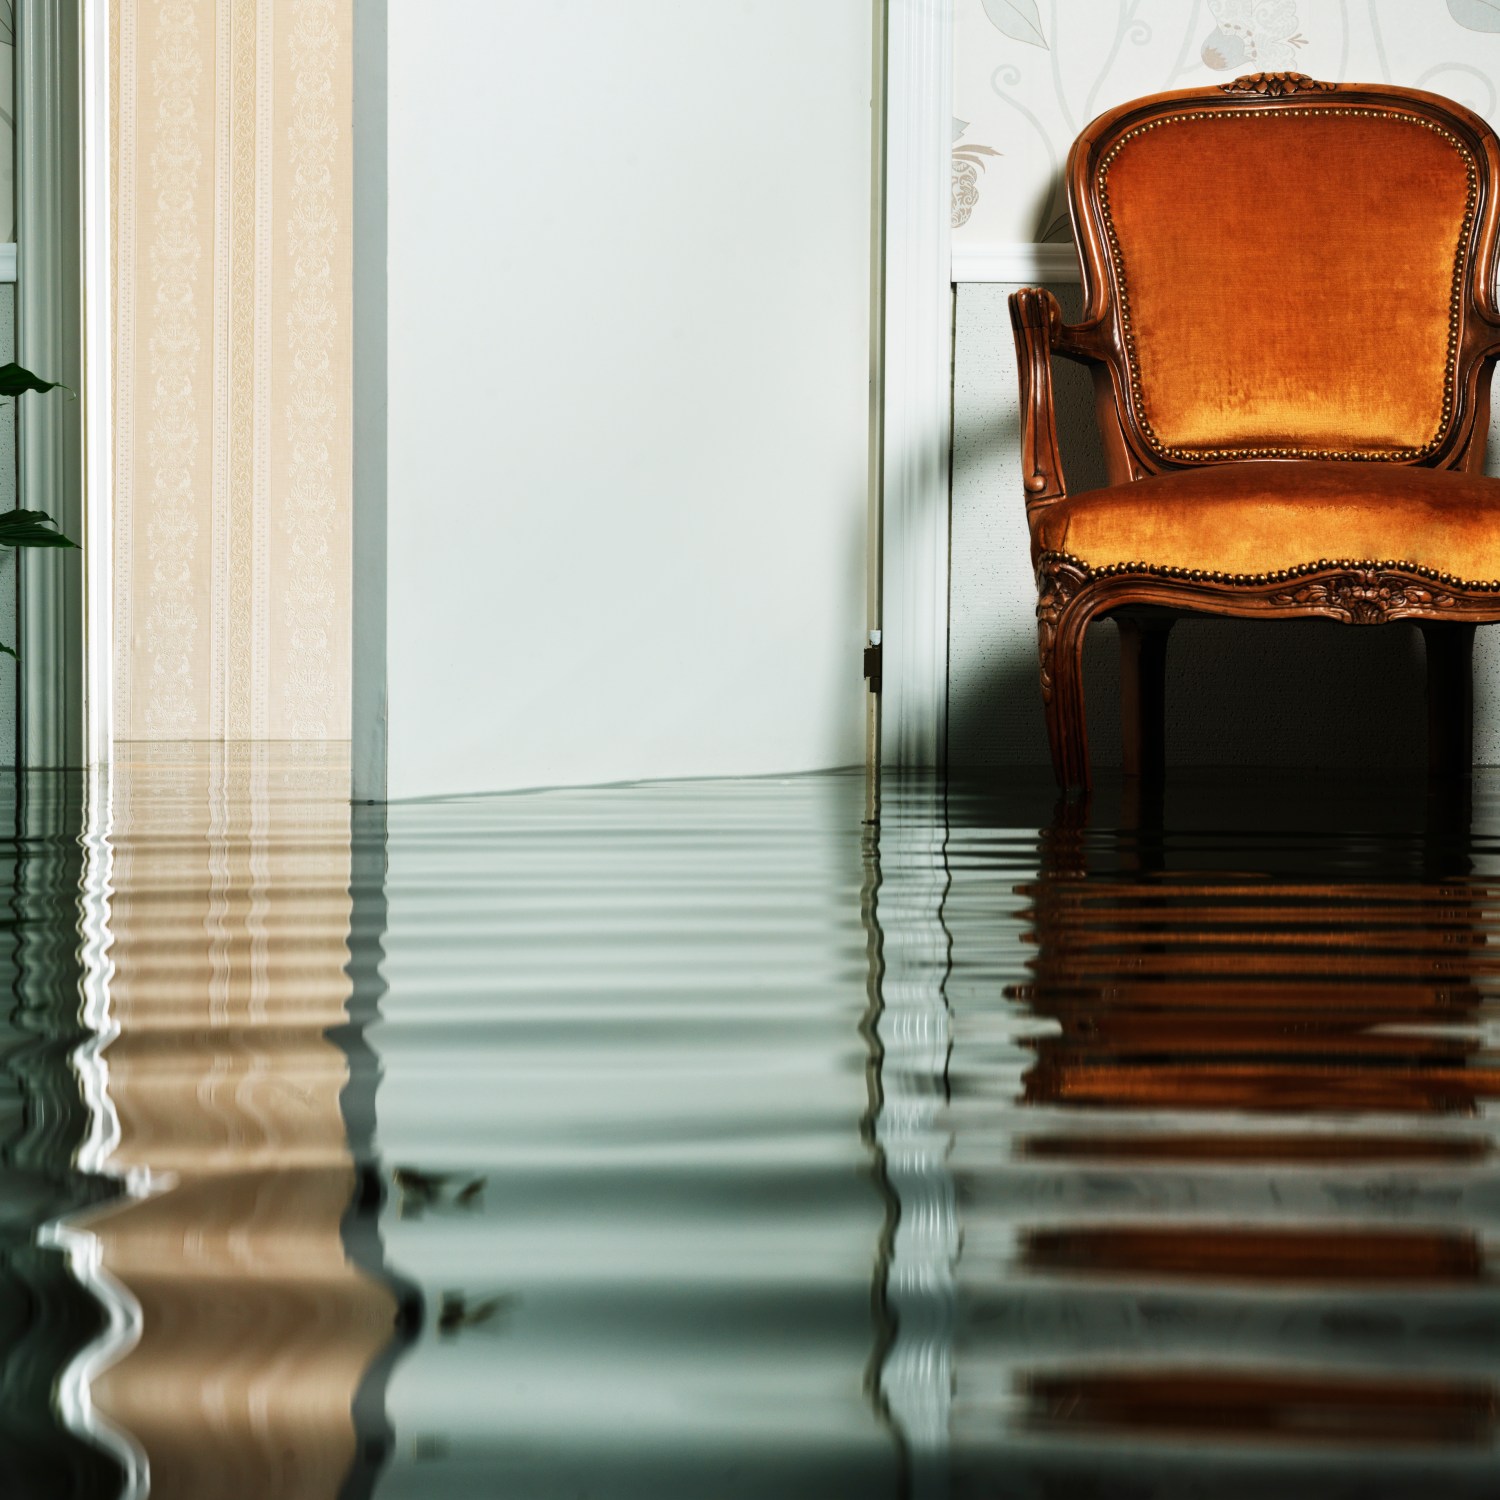 antique chair in flooded living room